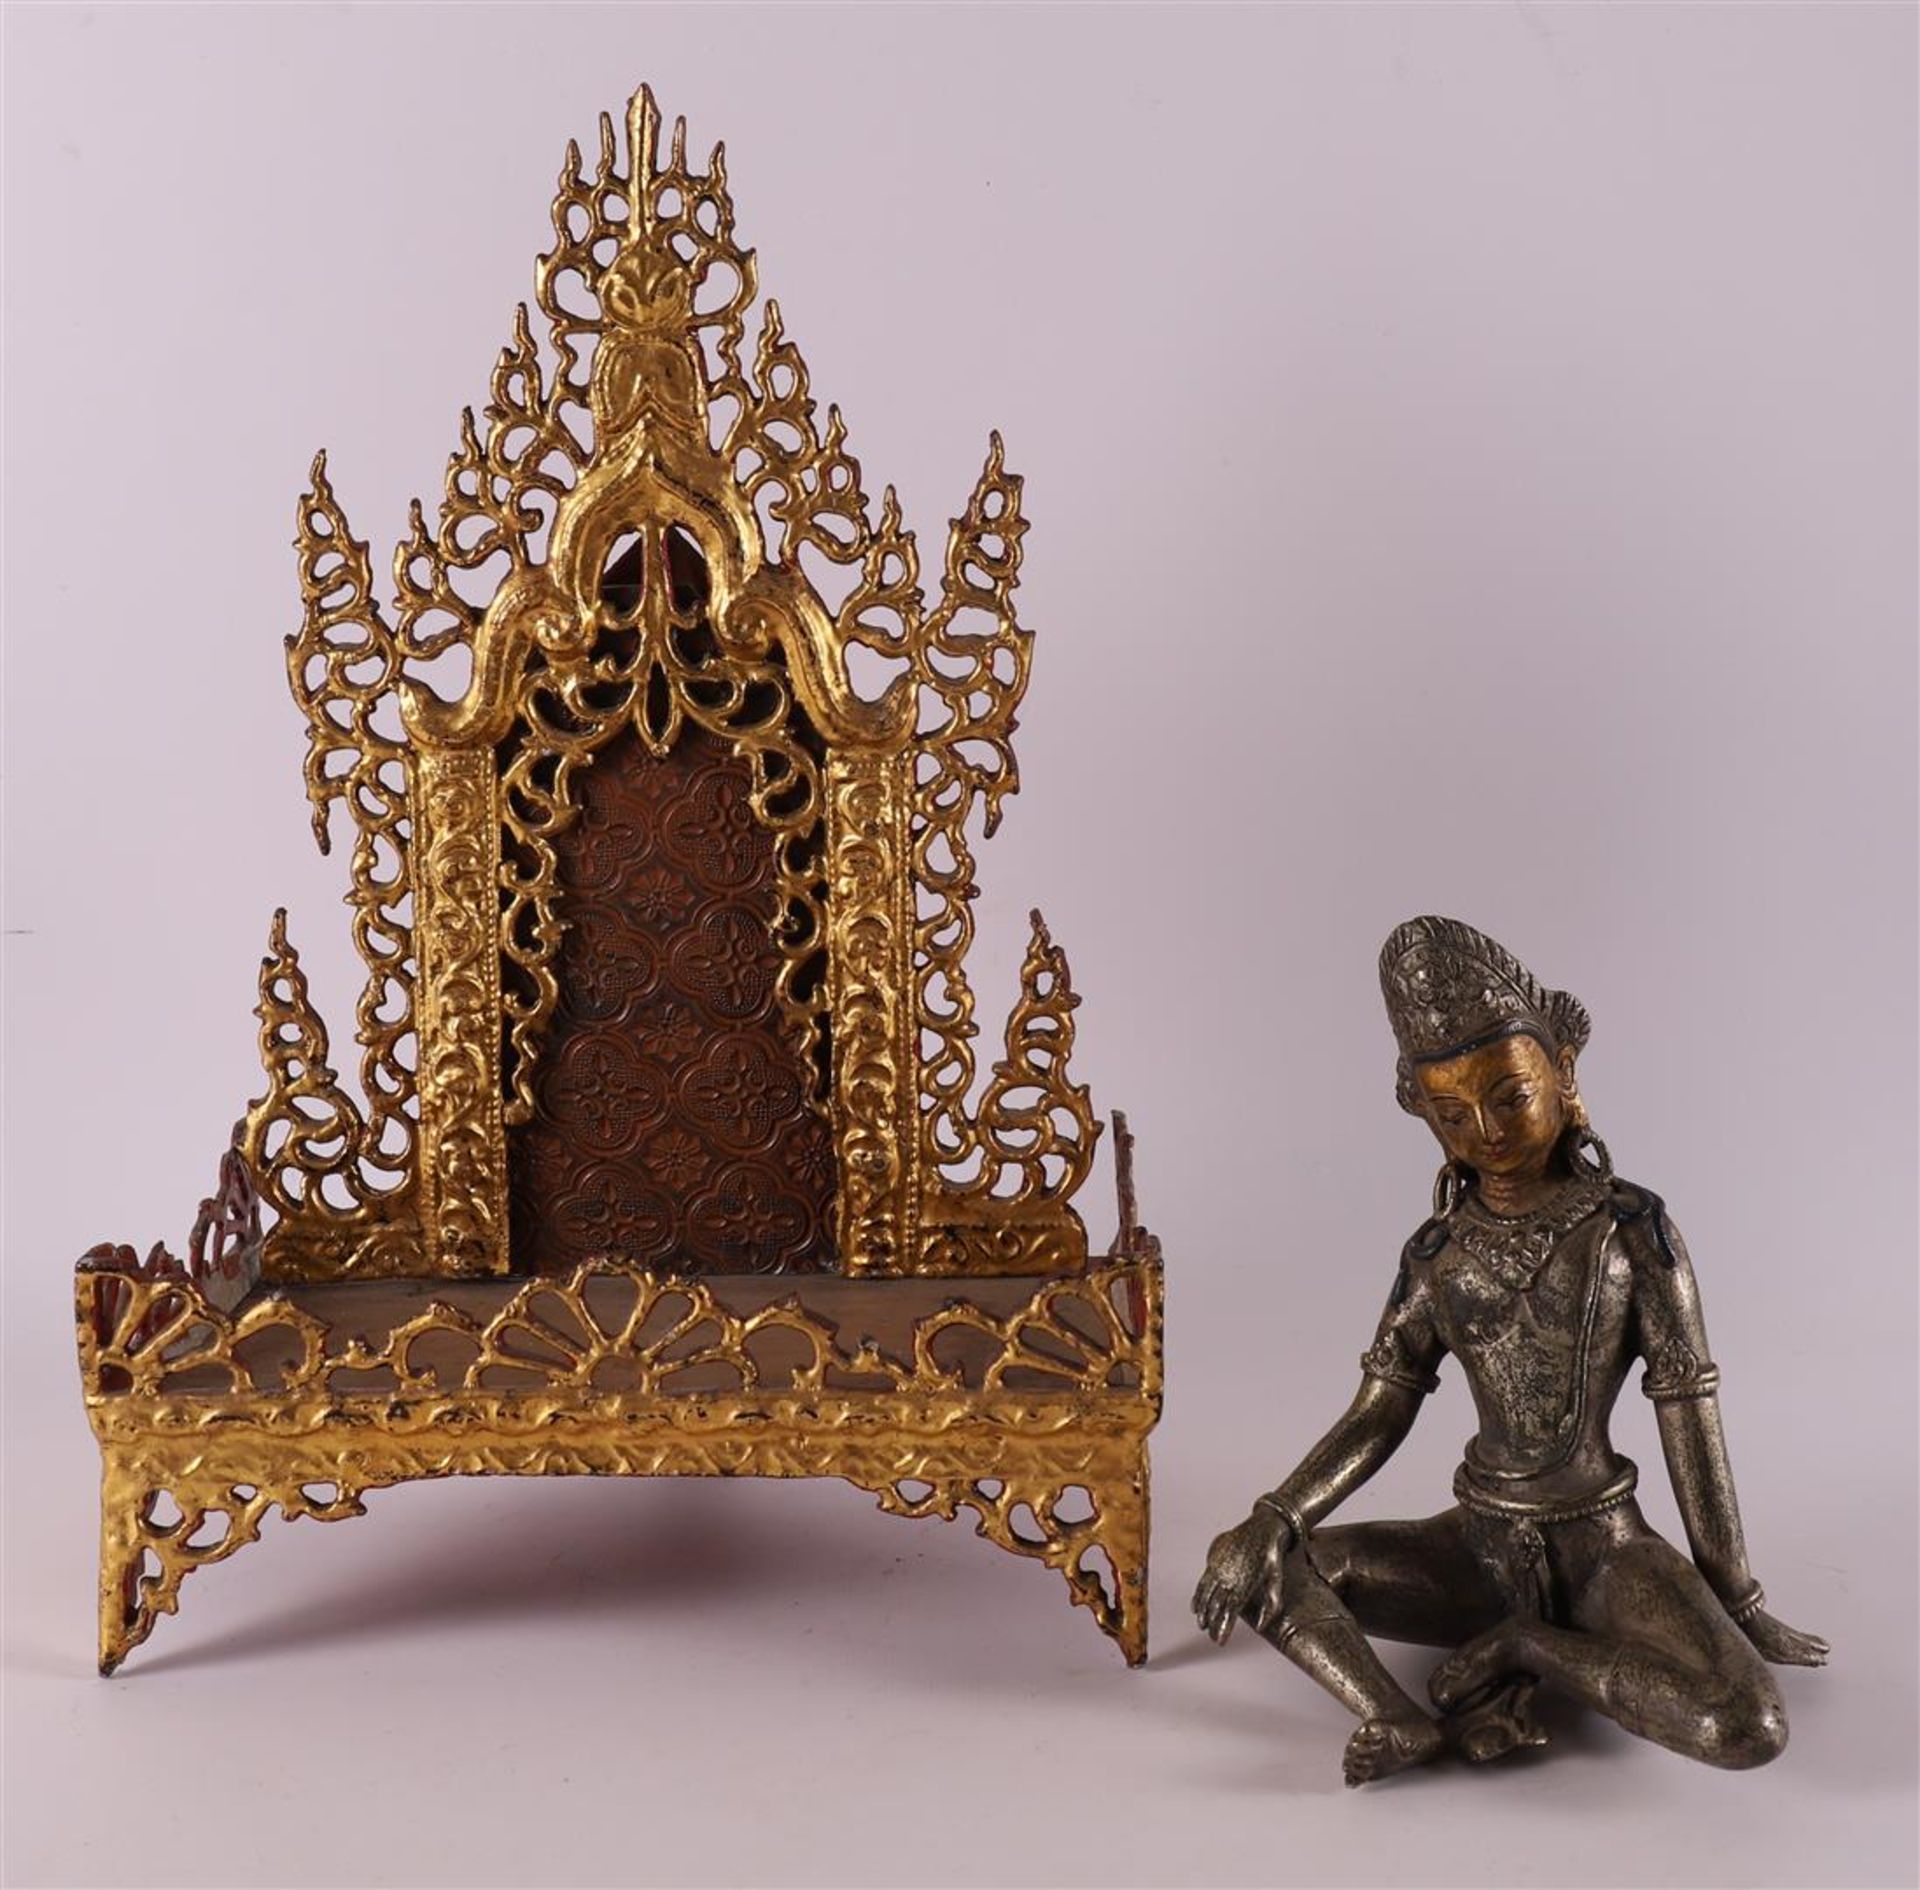 A silver-plated bronze Buddha on a loose gilded throne, India, 19th/20th century - Image 2 of 5